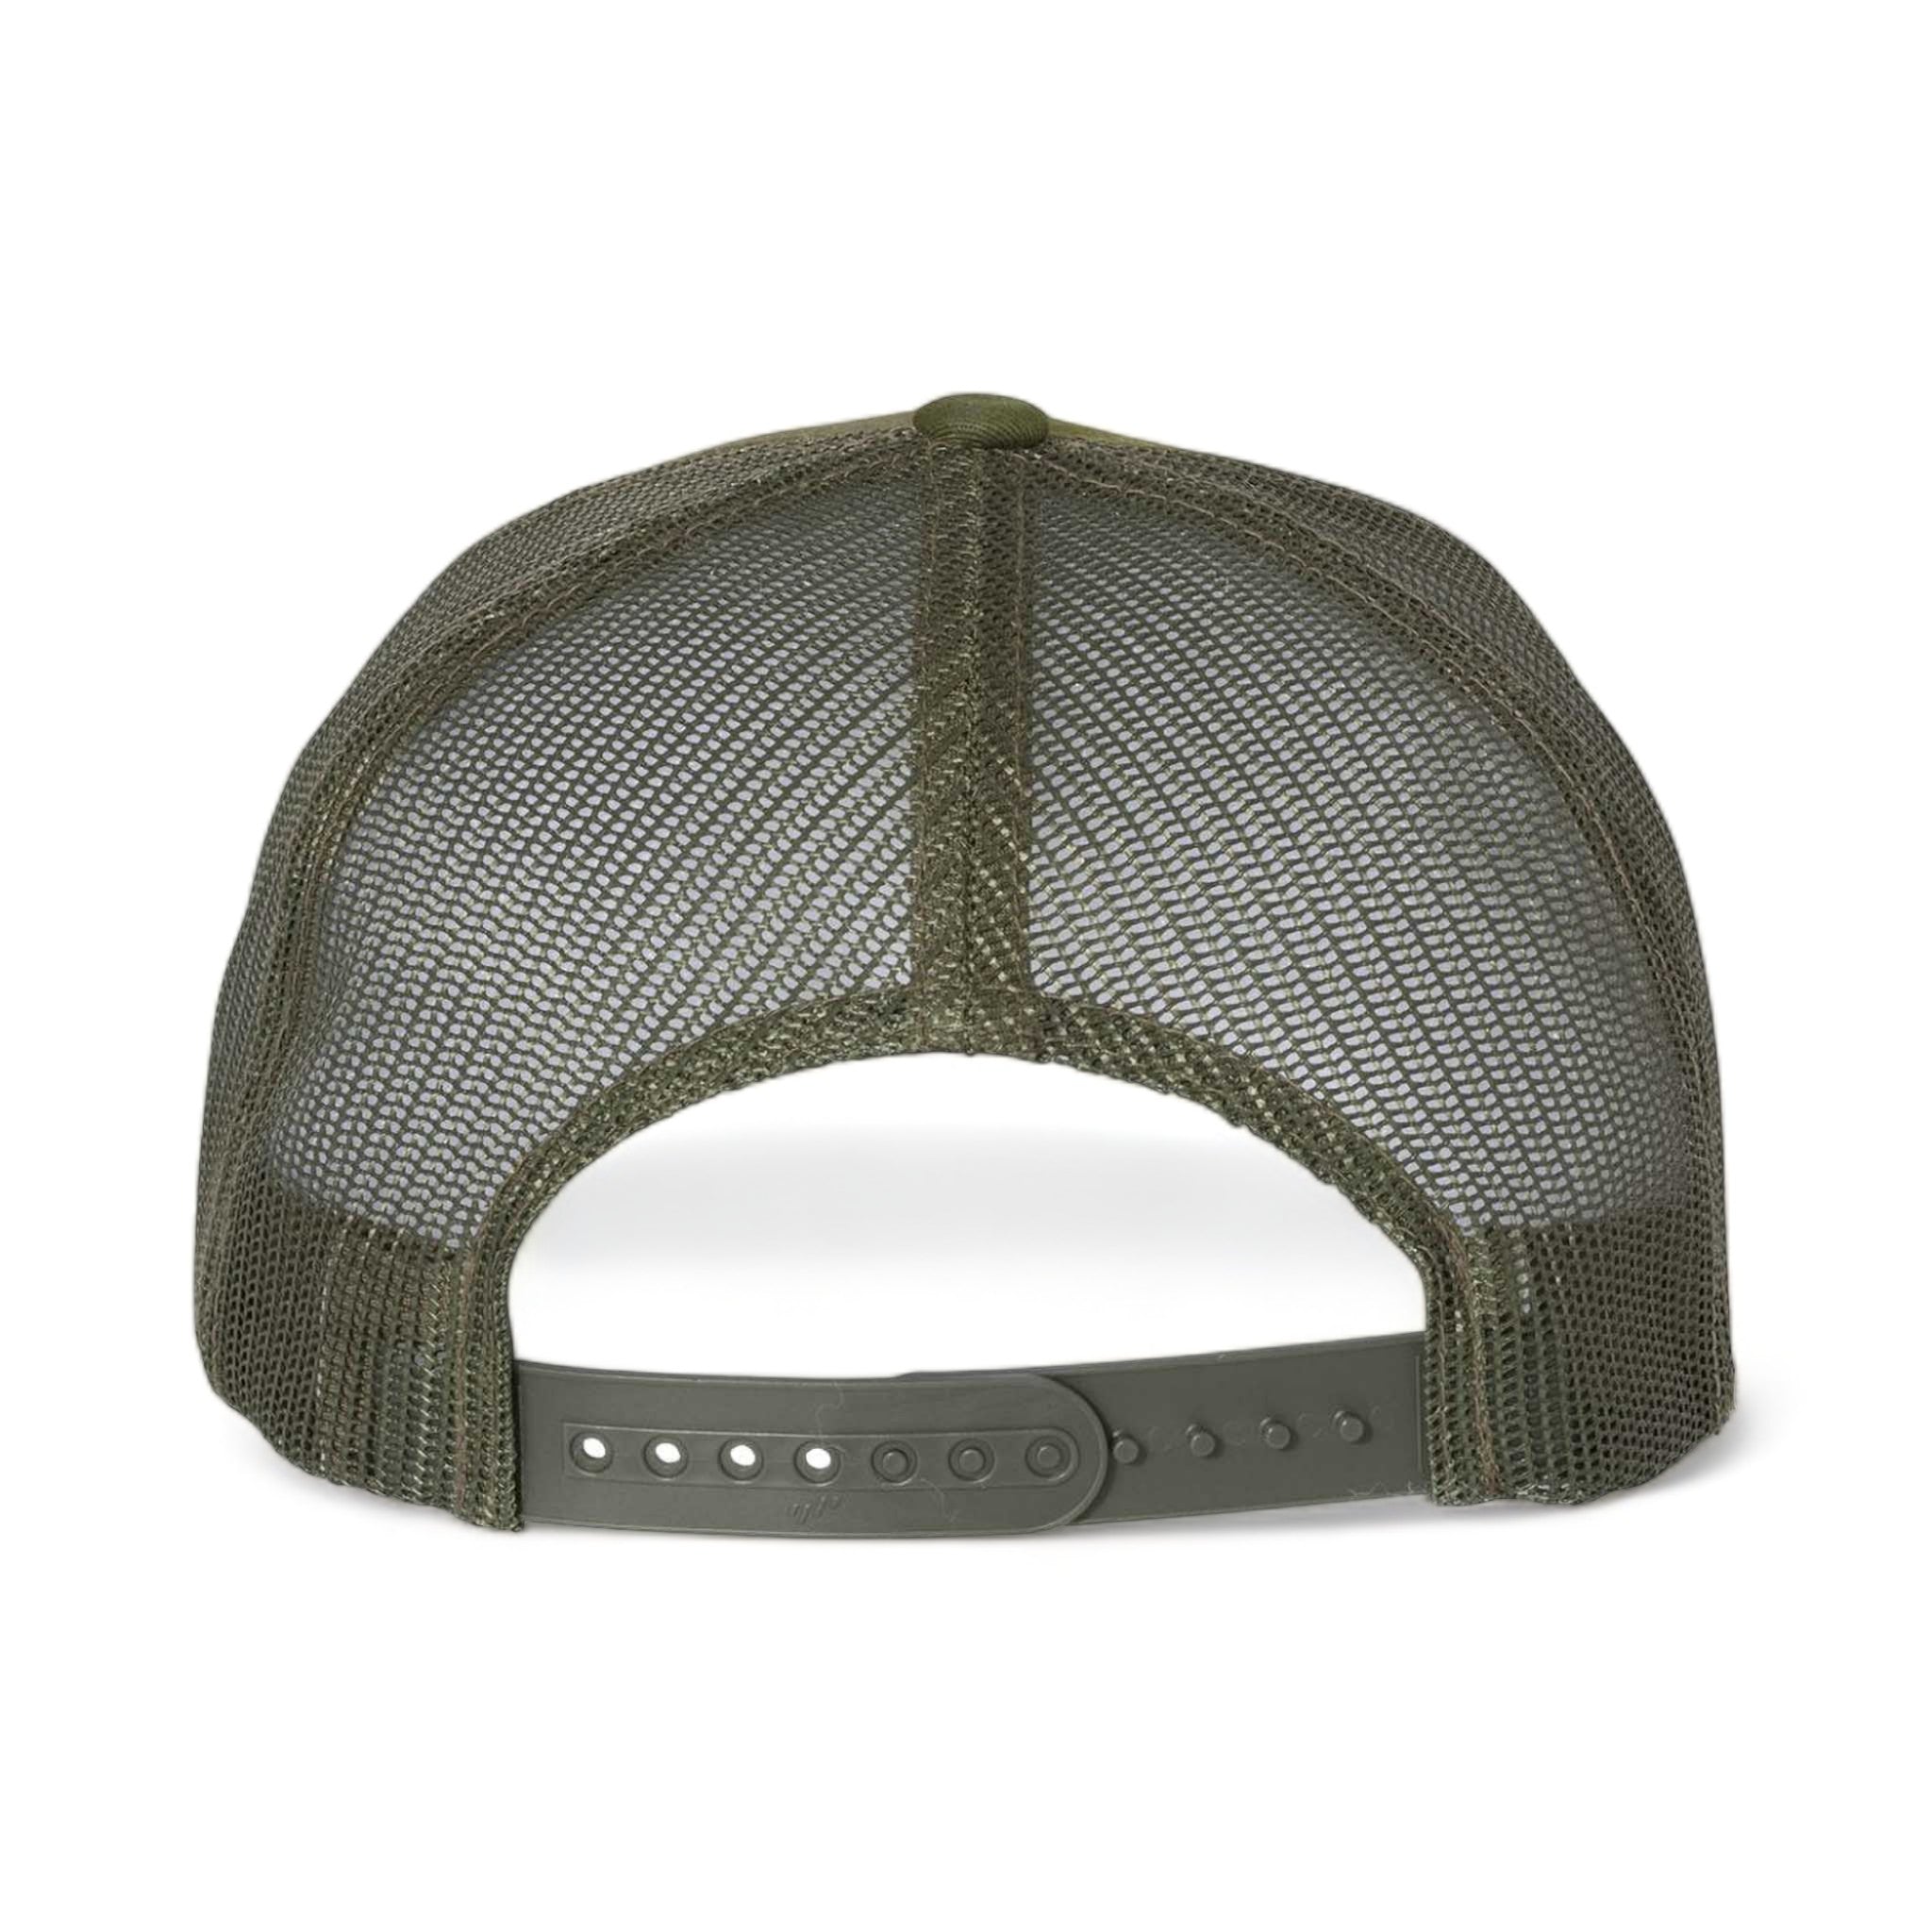 Back view of YP Classics 6606 custom hat in multicam tropic and green